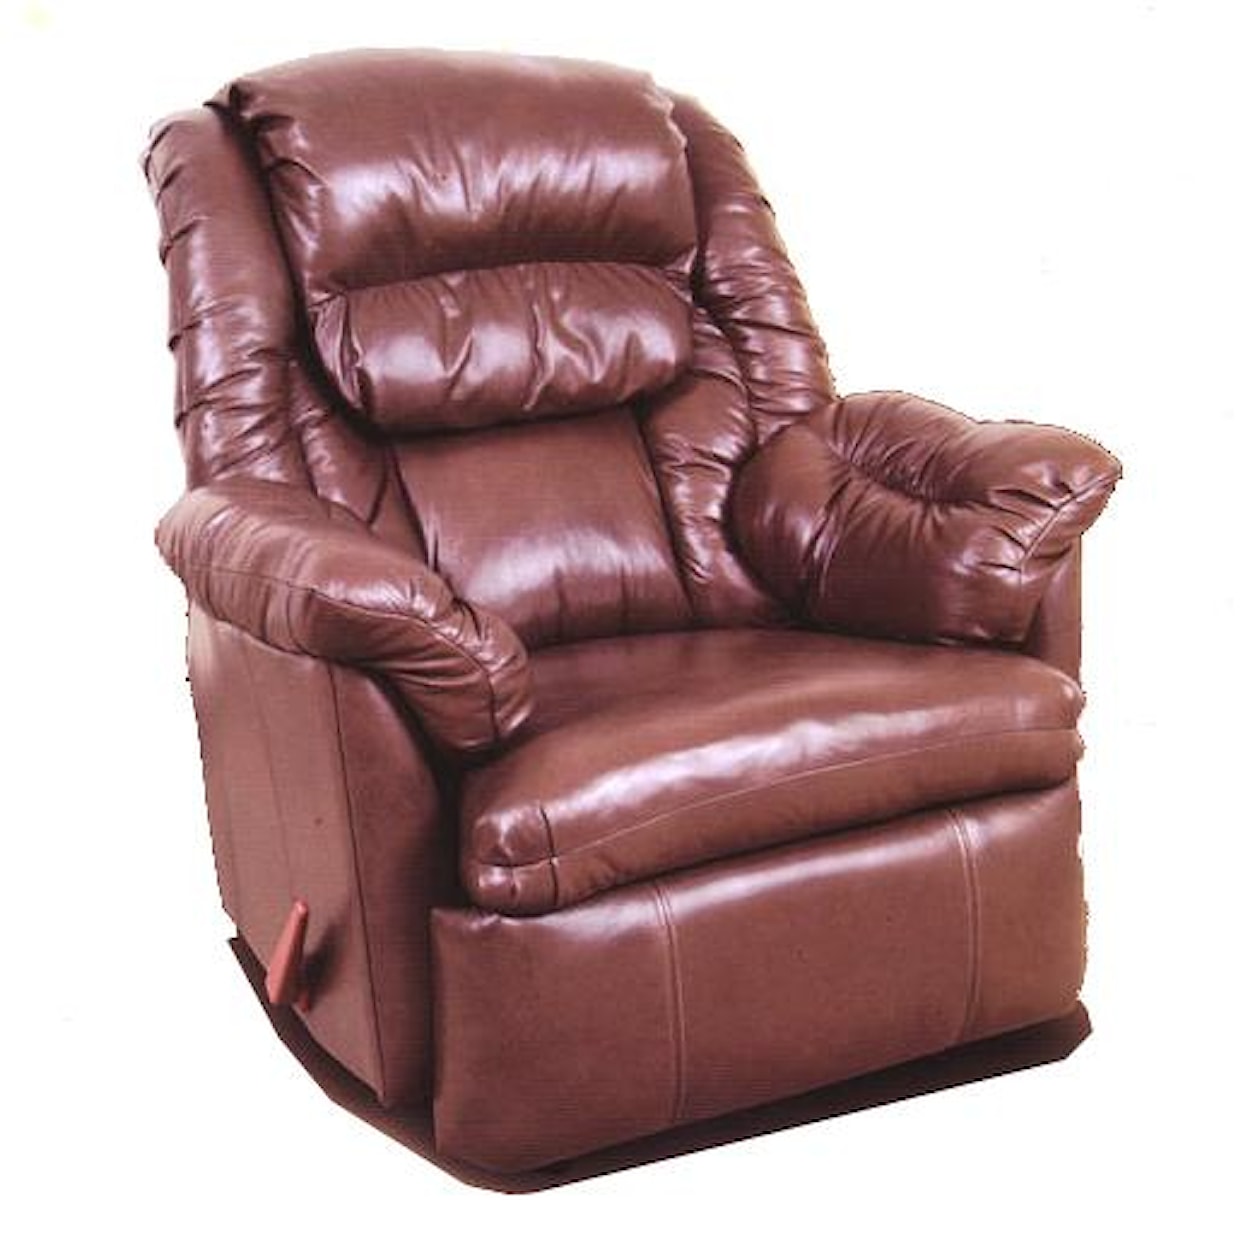 Ort Manufacturing Reserve Seating 100% Leather Wall Recliner w/ Coil Seating